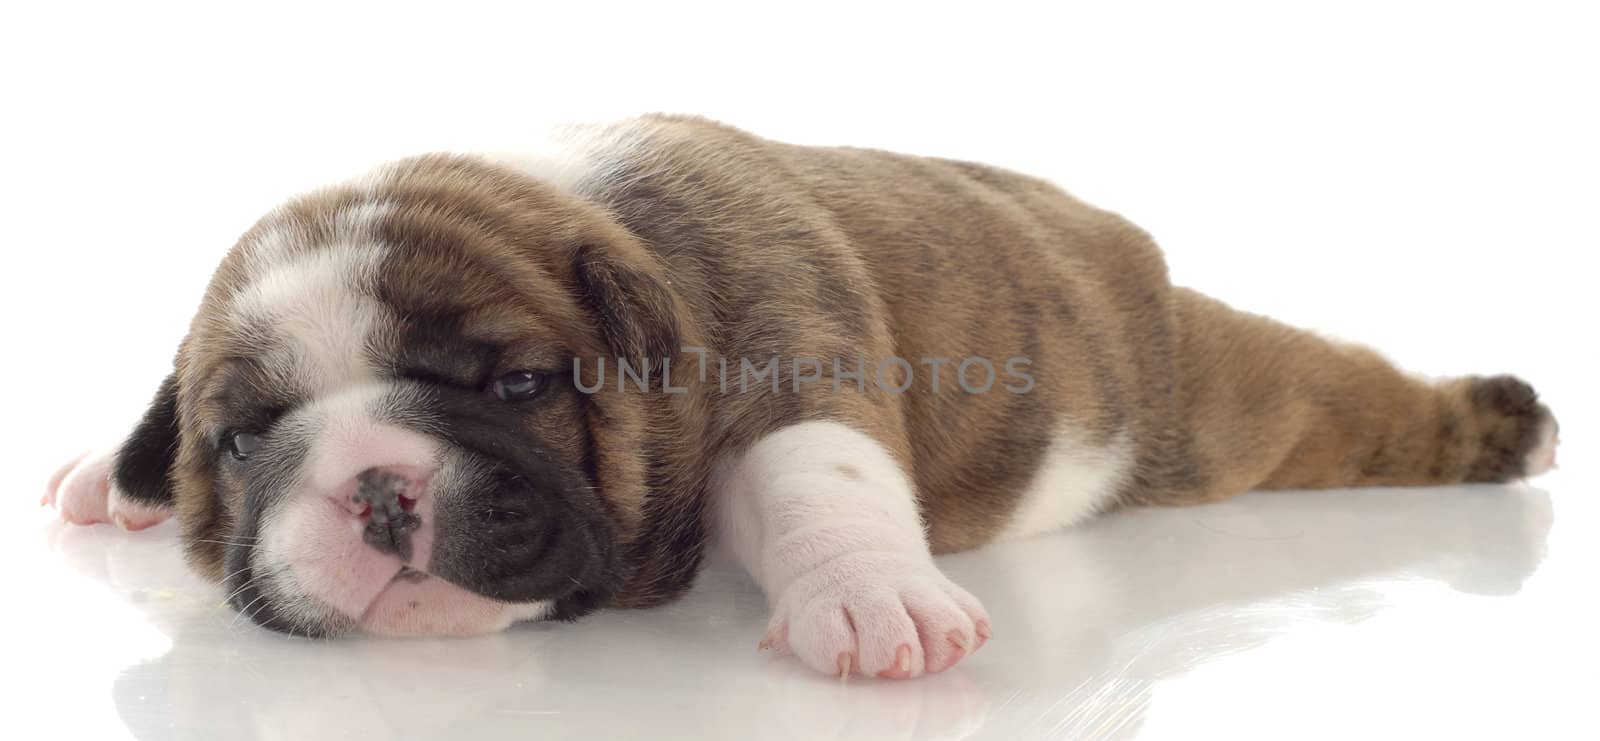 baby bulldog by willeecole123